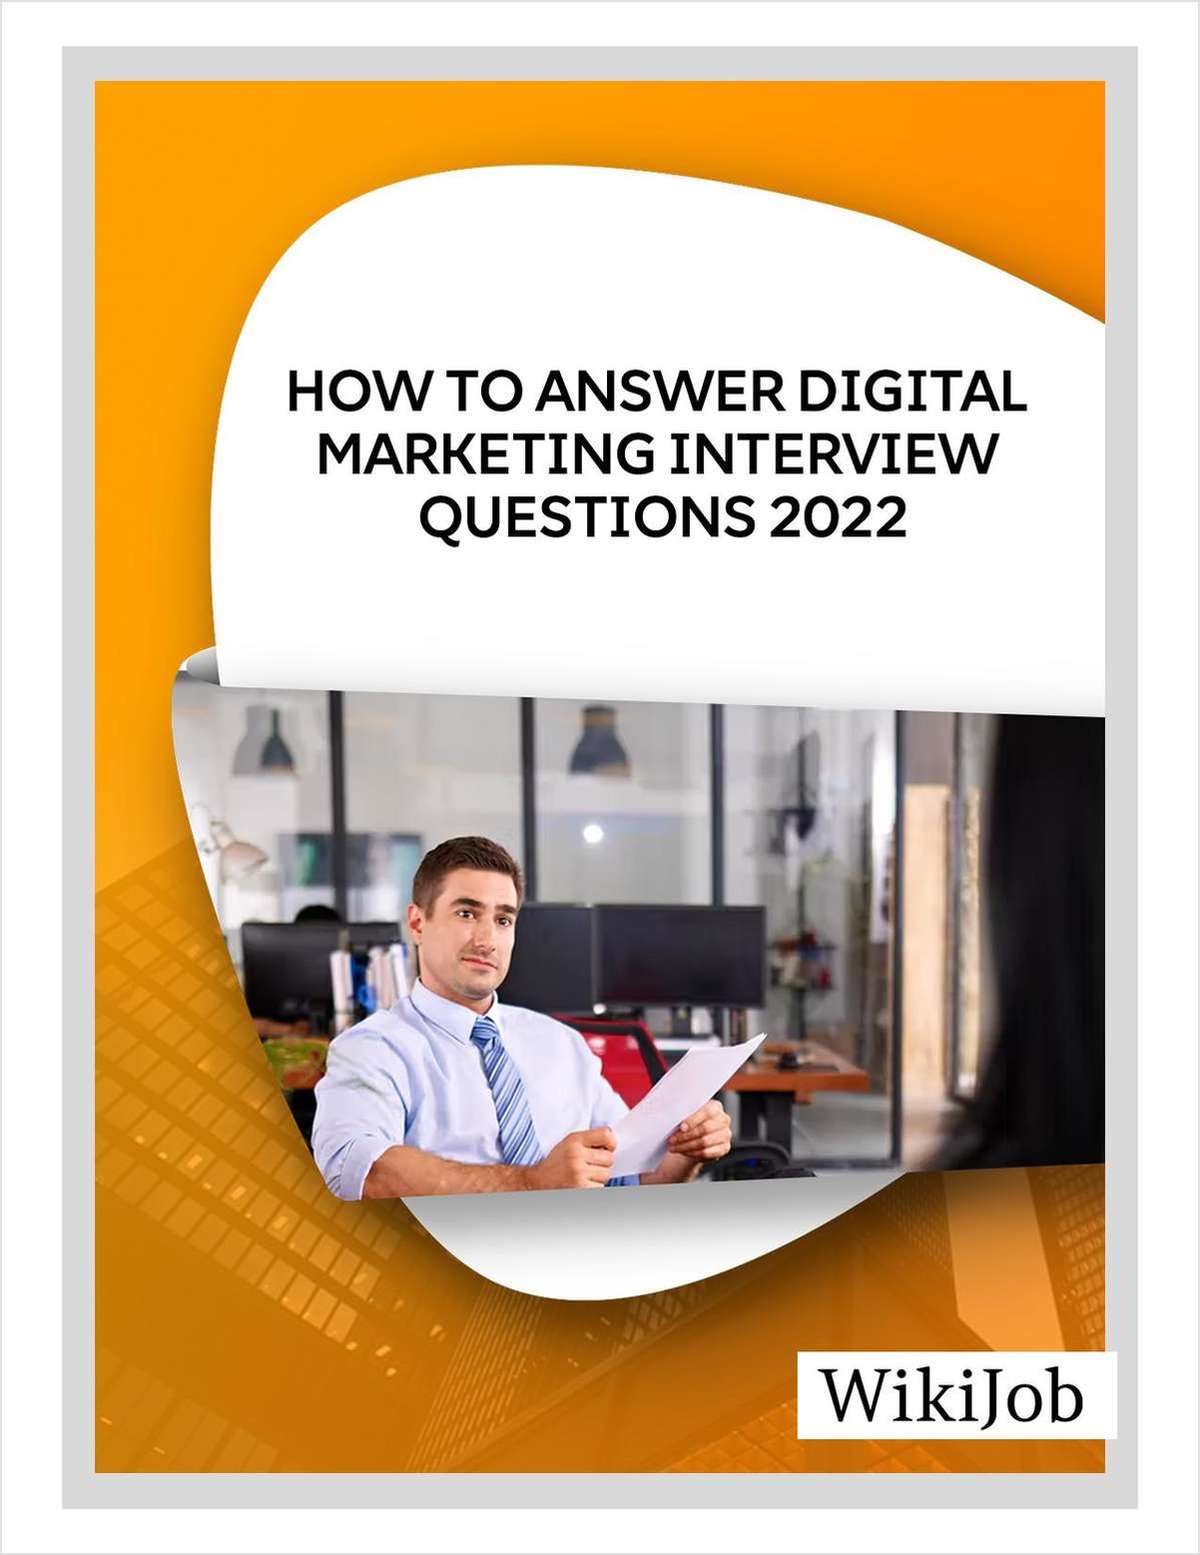 How to Answer Digital Marketing Interview Questions 2022